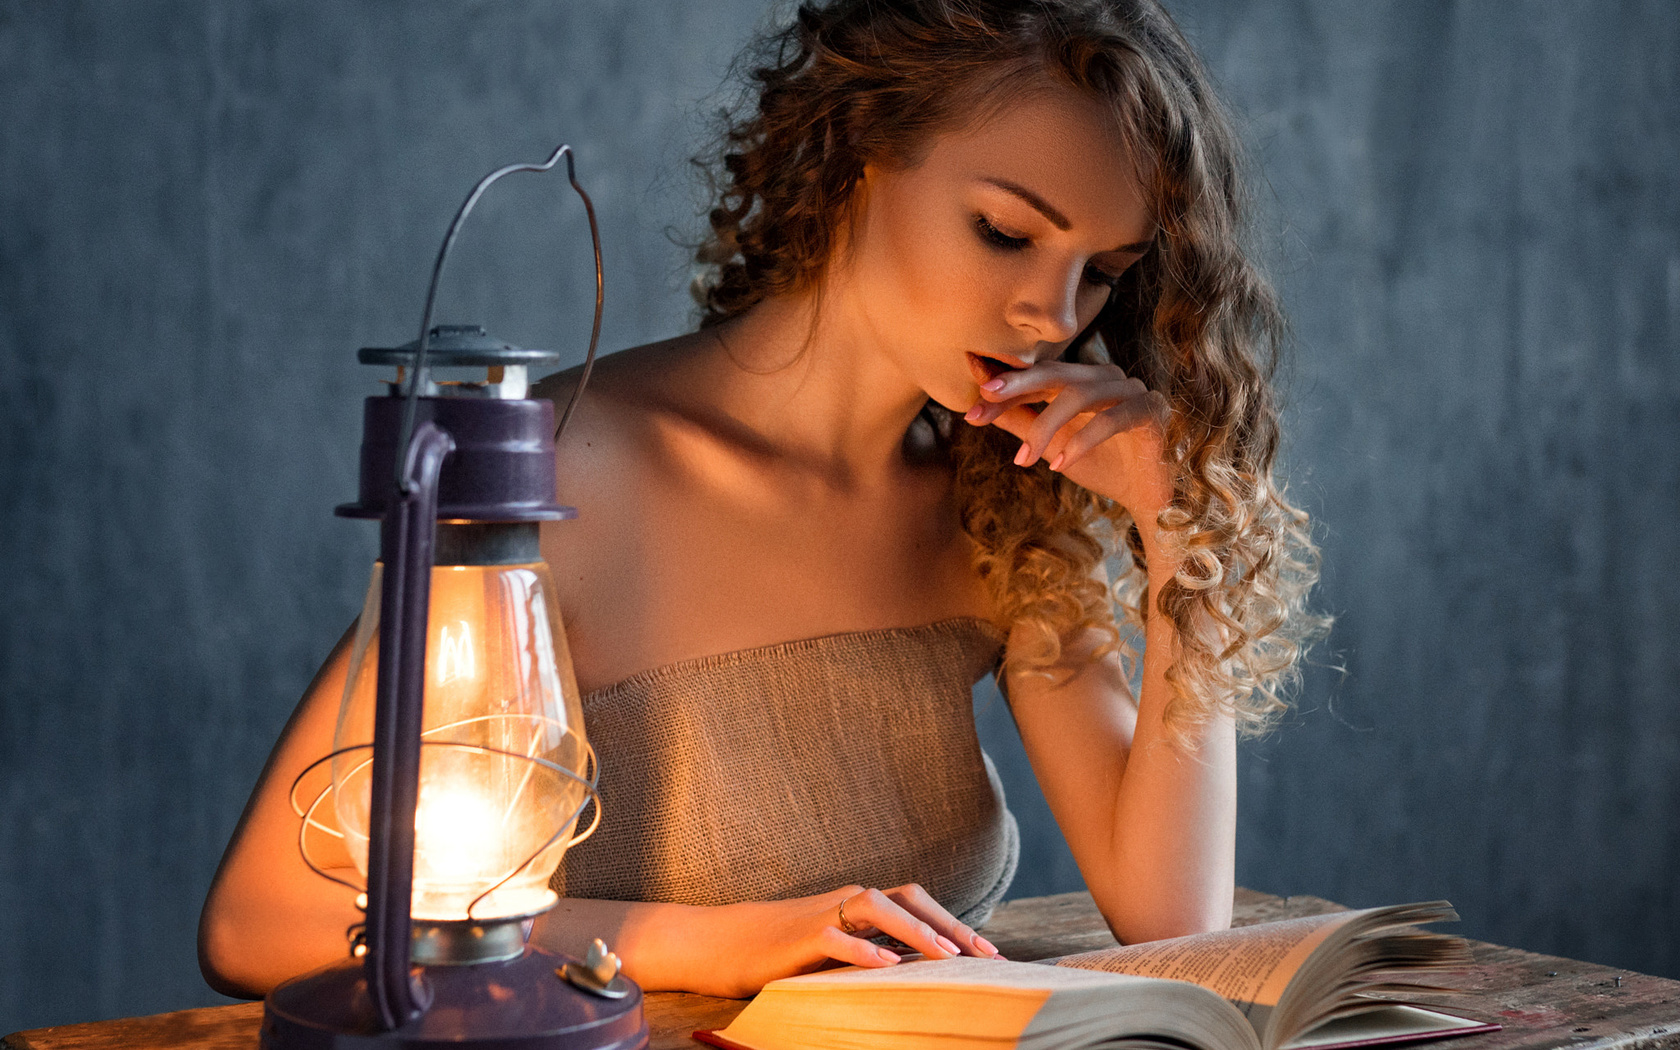 women, blonde, books, table, pink nails, gas lamps, curly hair, portrait, 